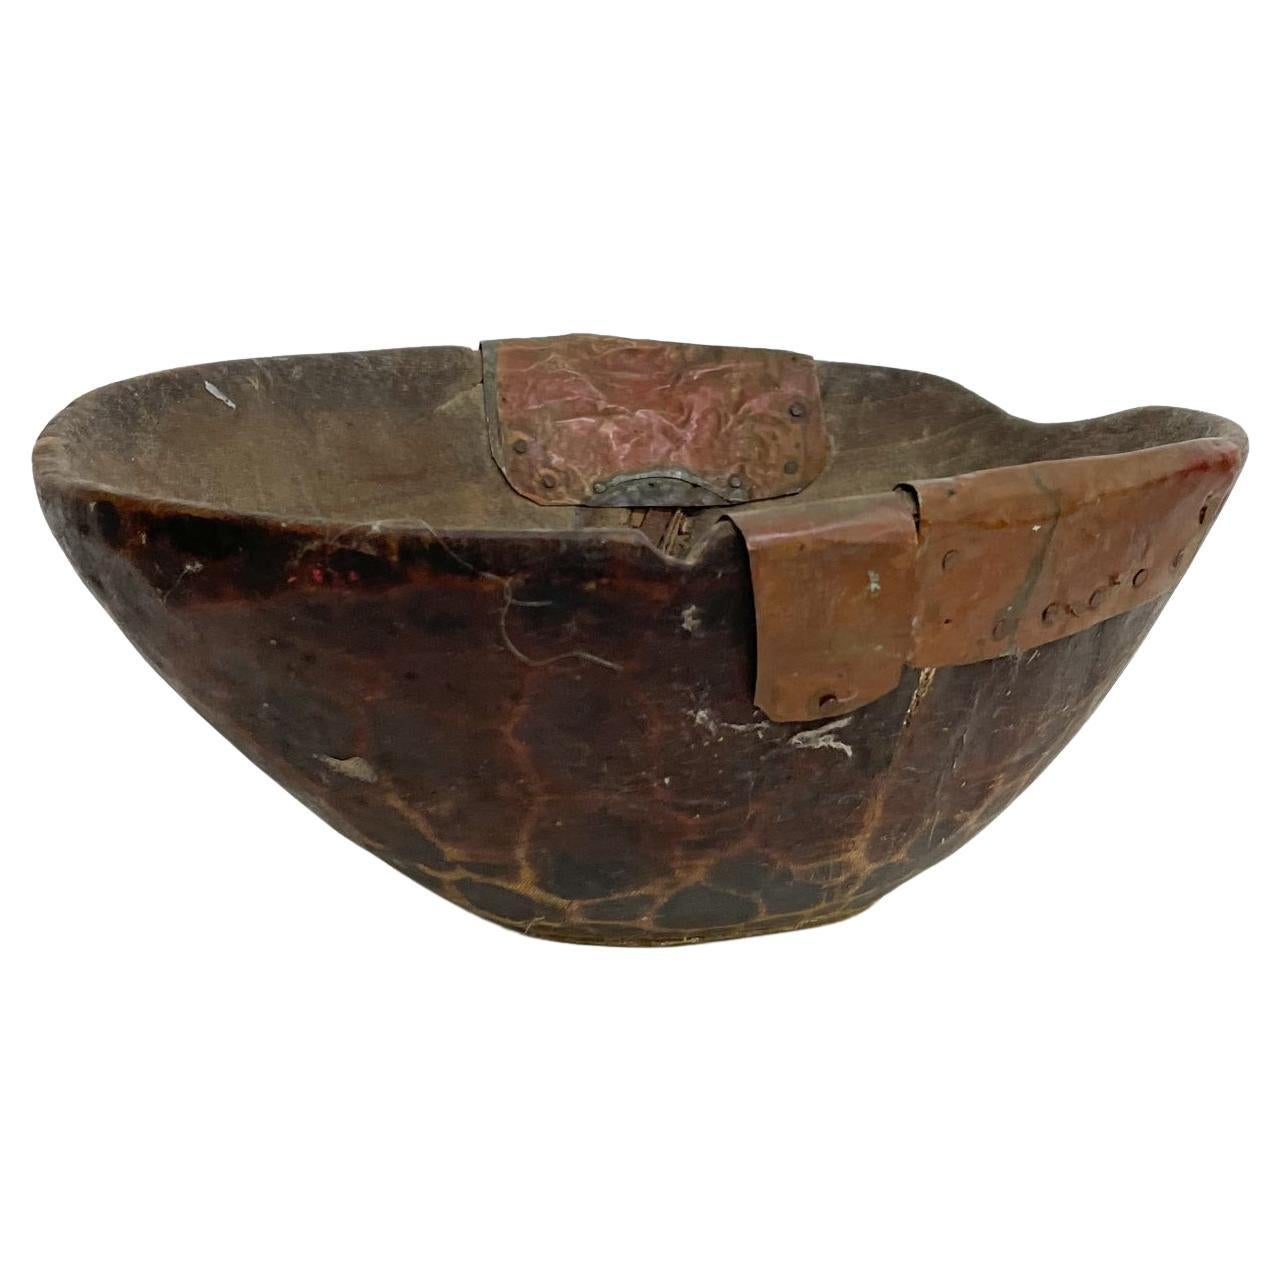 Handmade Sculptural Antique Rustic Wood Bowl with Decorative Copper